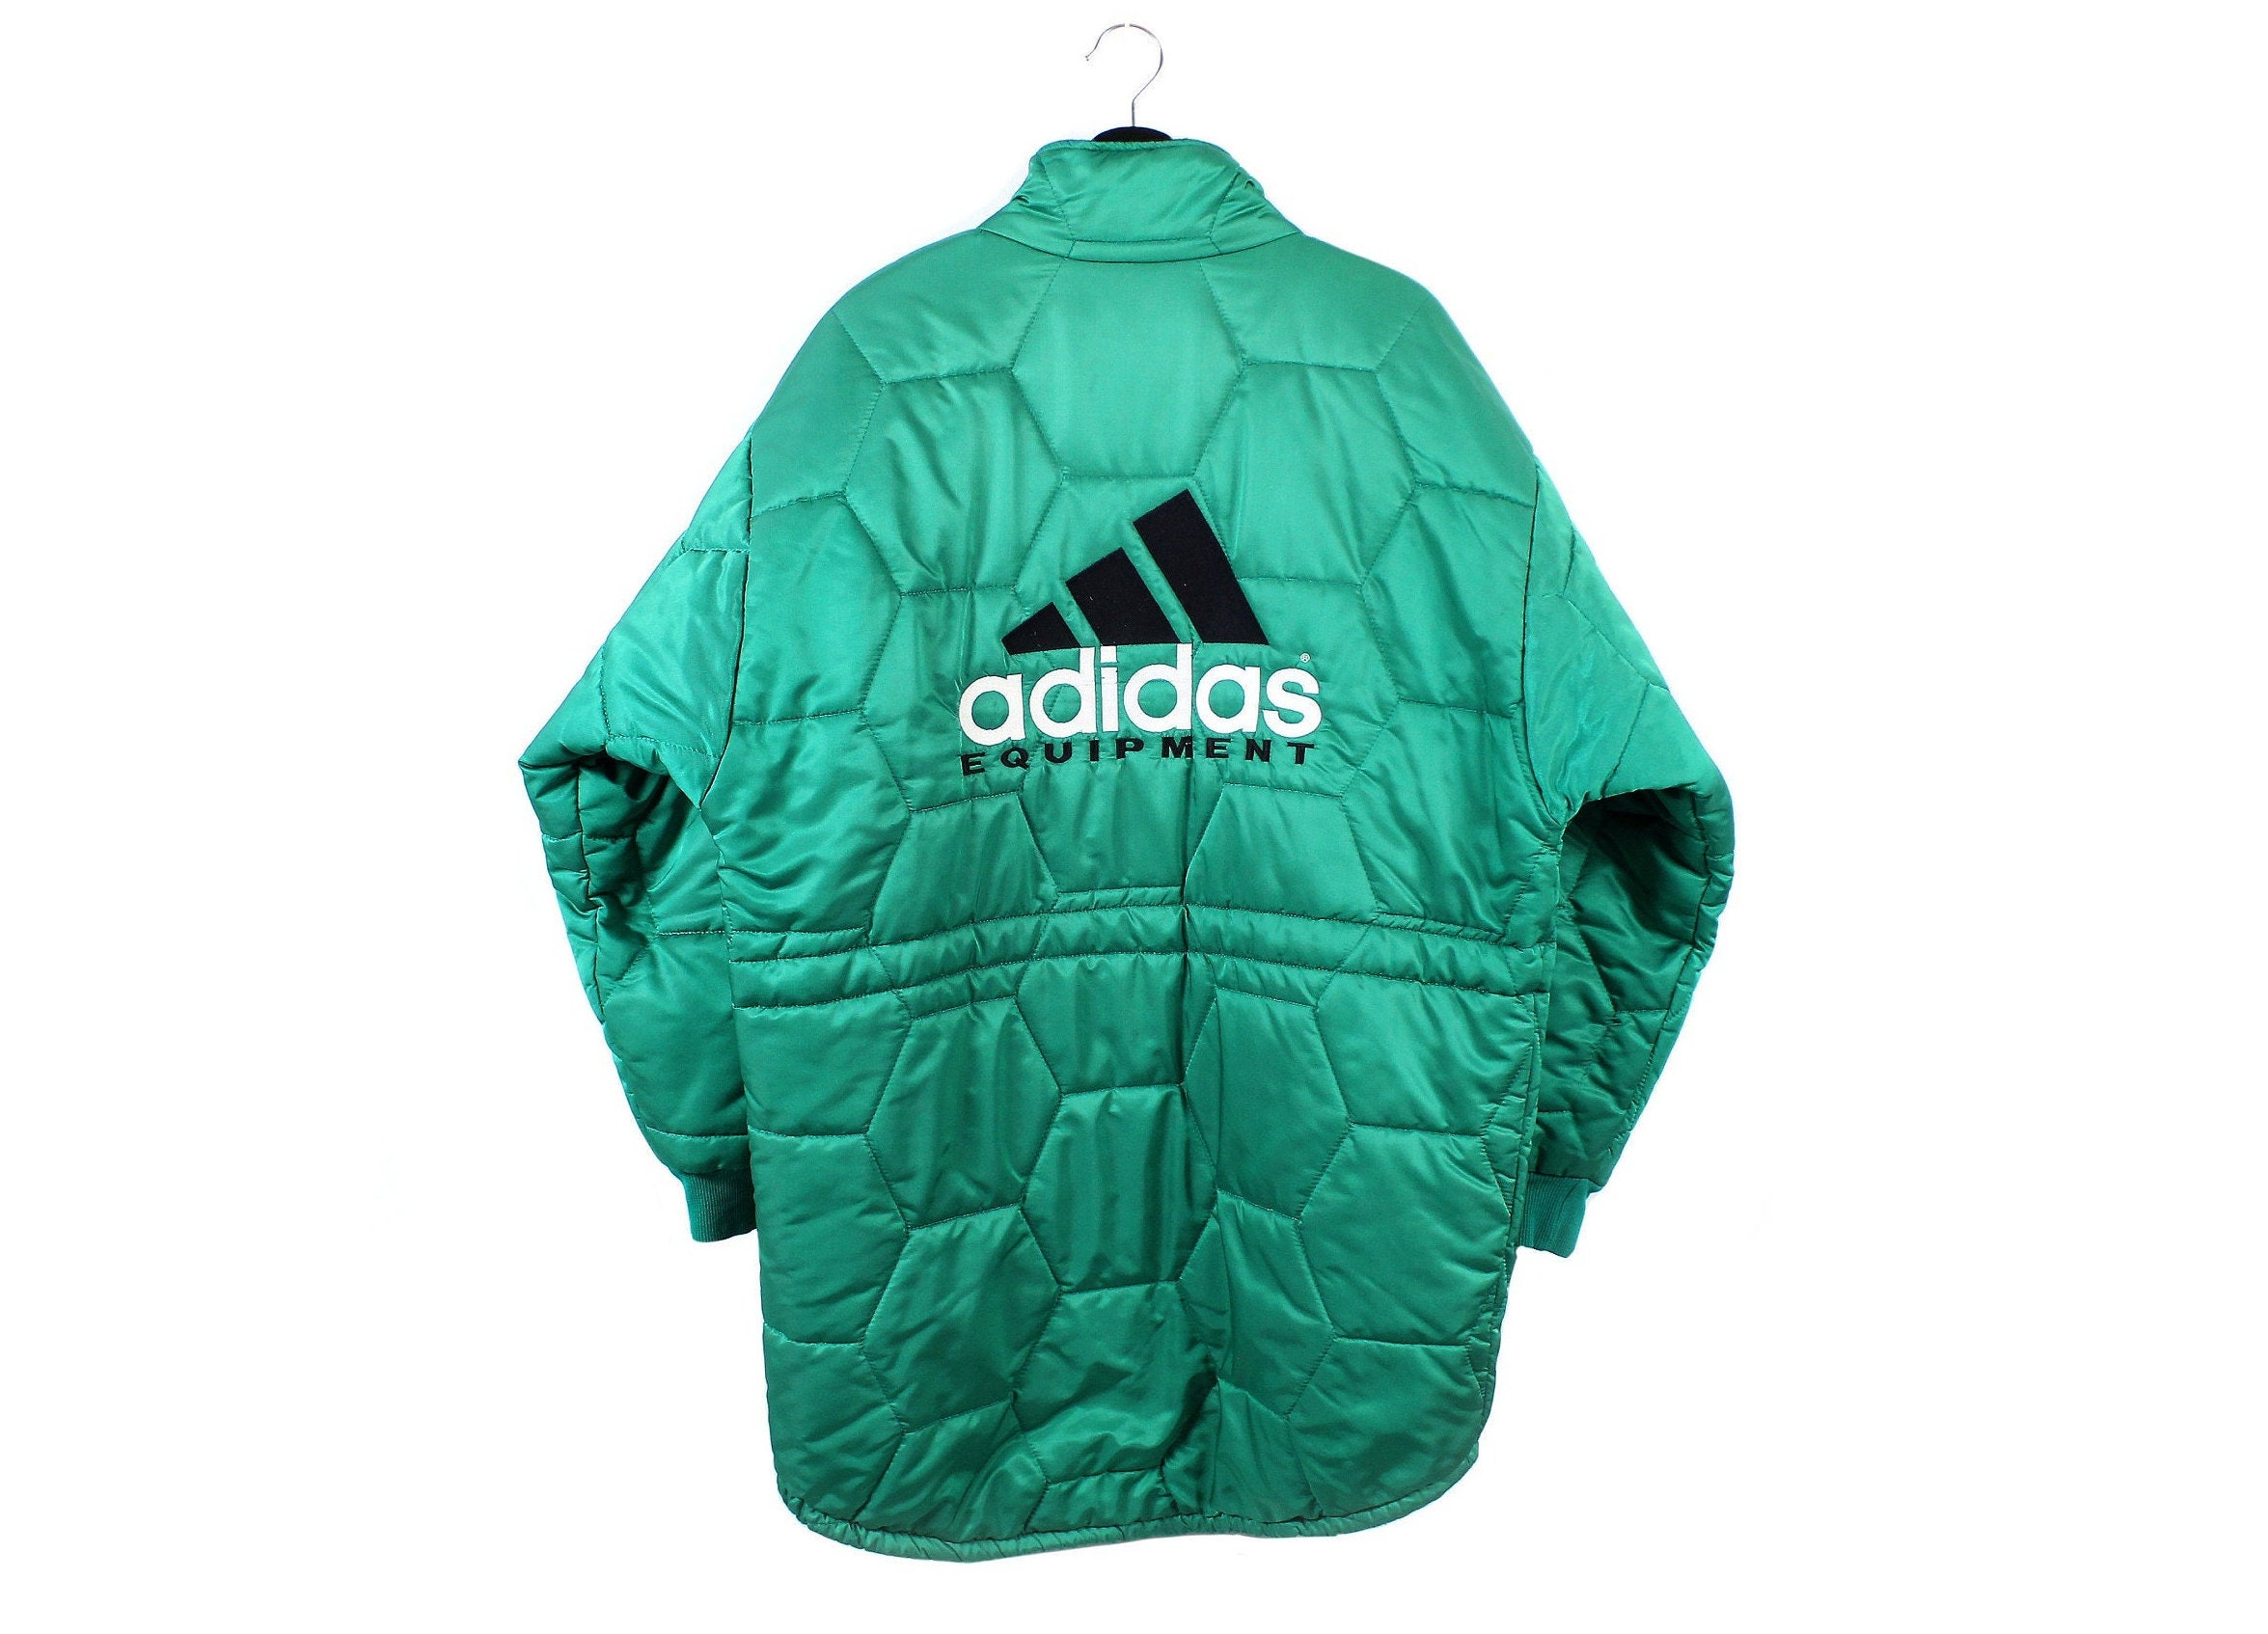 90s Adidas EQUIPMENT Vintage Quilt Padded EQT Quilt -